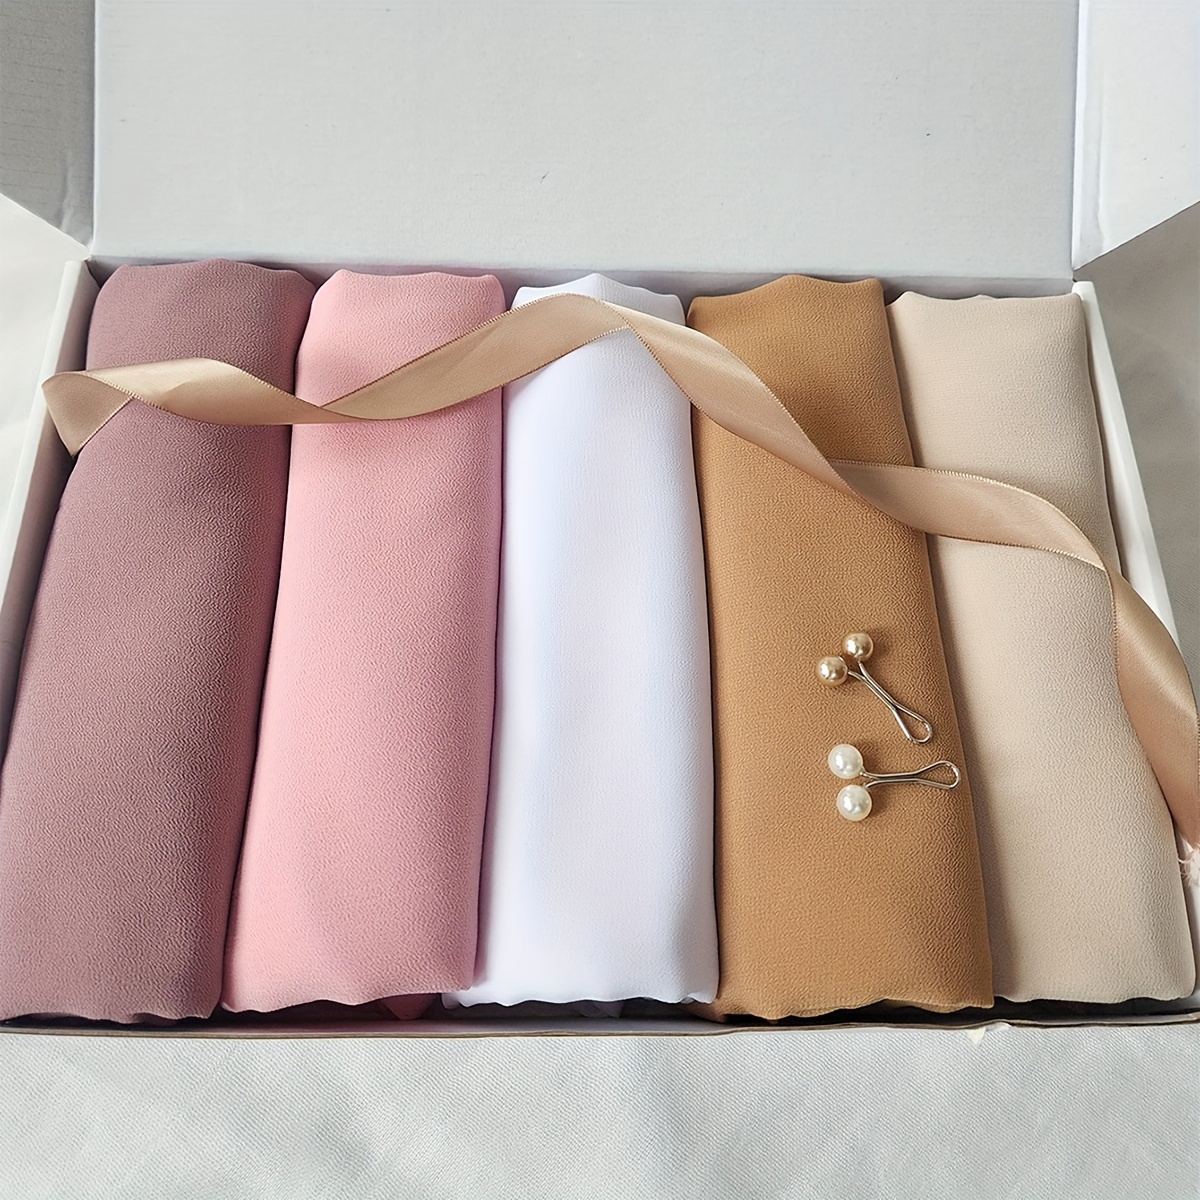 

5pcs Elegant Chiffon Scarves With 2pcs Hijab Pins Combination, Solid Color Lightweight Shawls For Women, Versatile Daily Wear, Boxed Gift Gifts For Eid